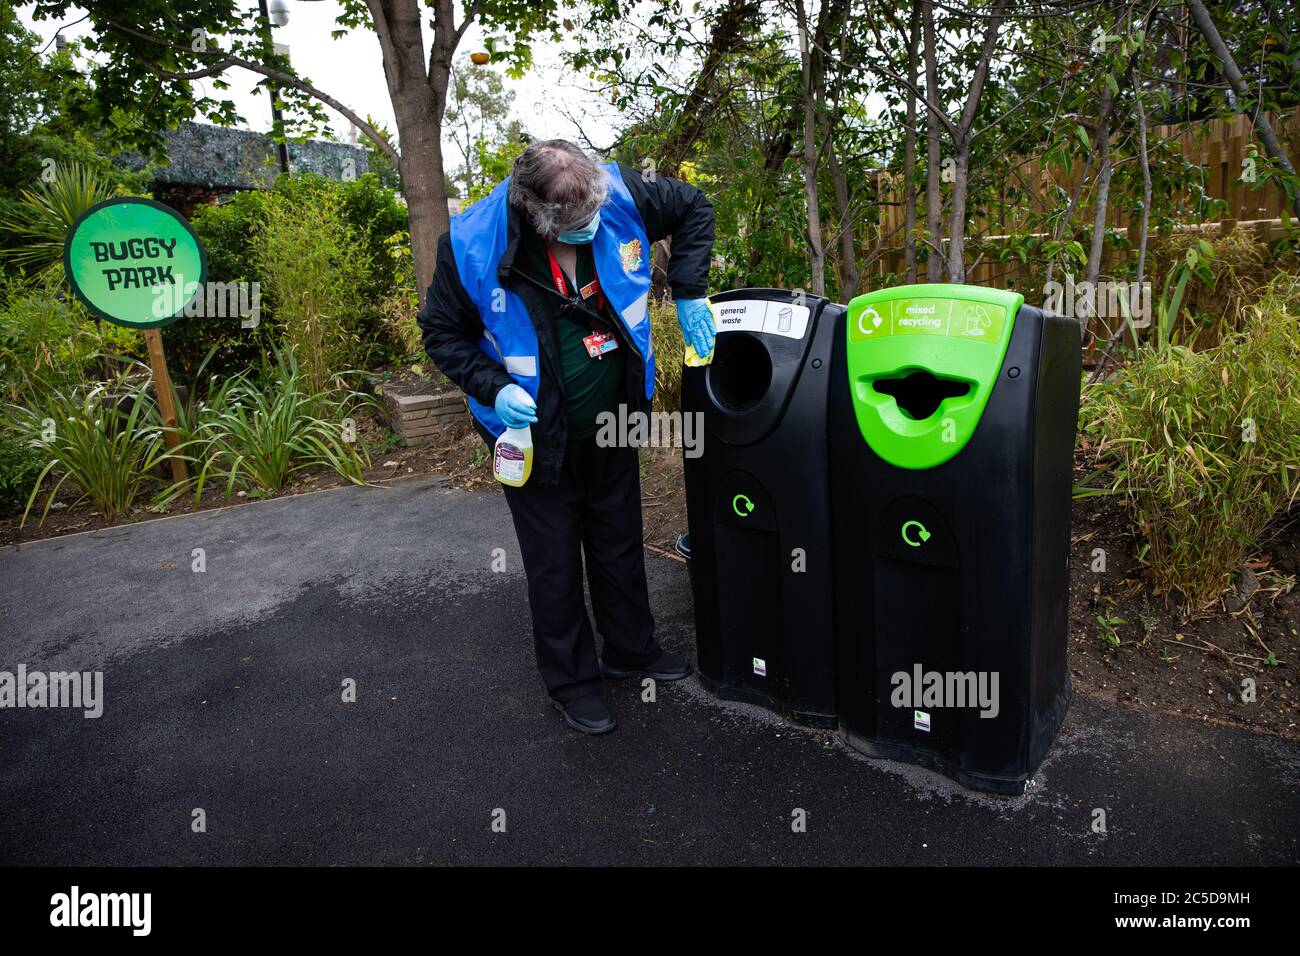 A bin is wiped clean at Chessington World of Adventures in Surrey, as staff make final preparations ahead of reopening to members of the public when the lifting of further lockdown restrictions in England comes into effect on Saturday. Stock Photo